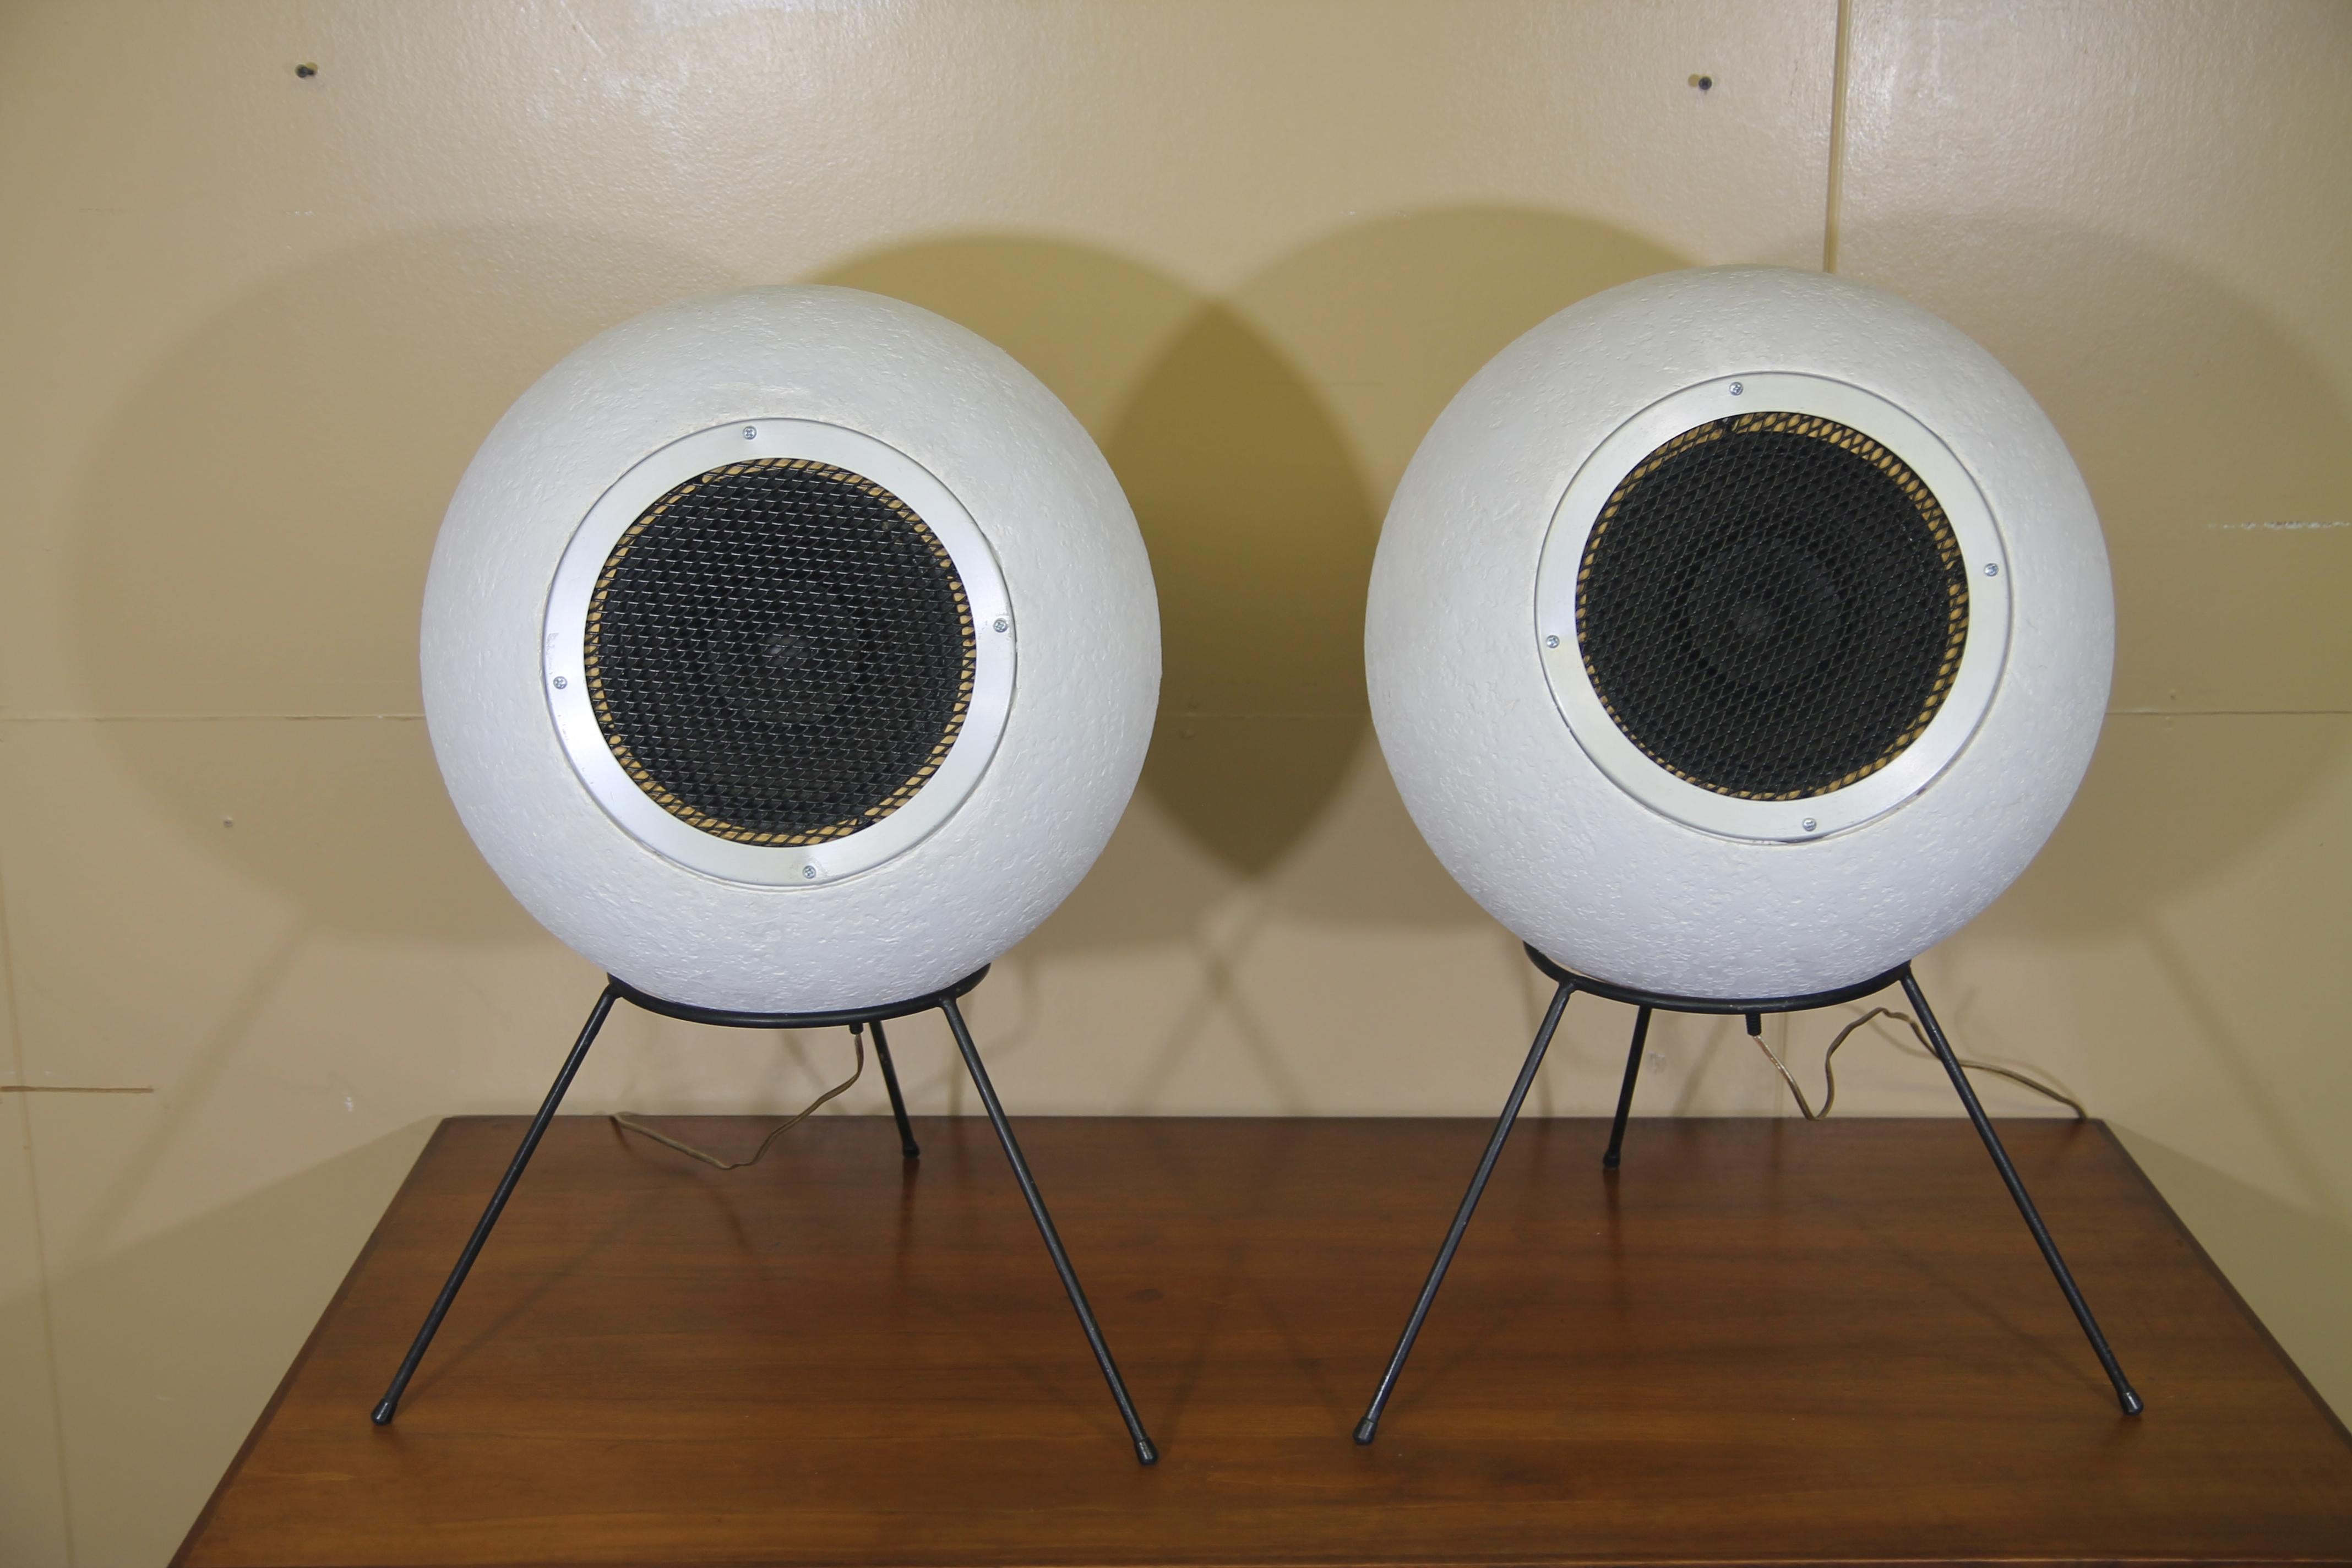 Super rare pair of Elipson AS40 speakers. This pair of speakers is in great condition and has had the drivers rebuilt. Nice soft sounds and will look great in your MCM home. Round speakers rest in metal tripod base.